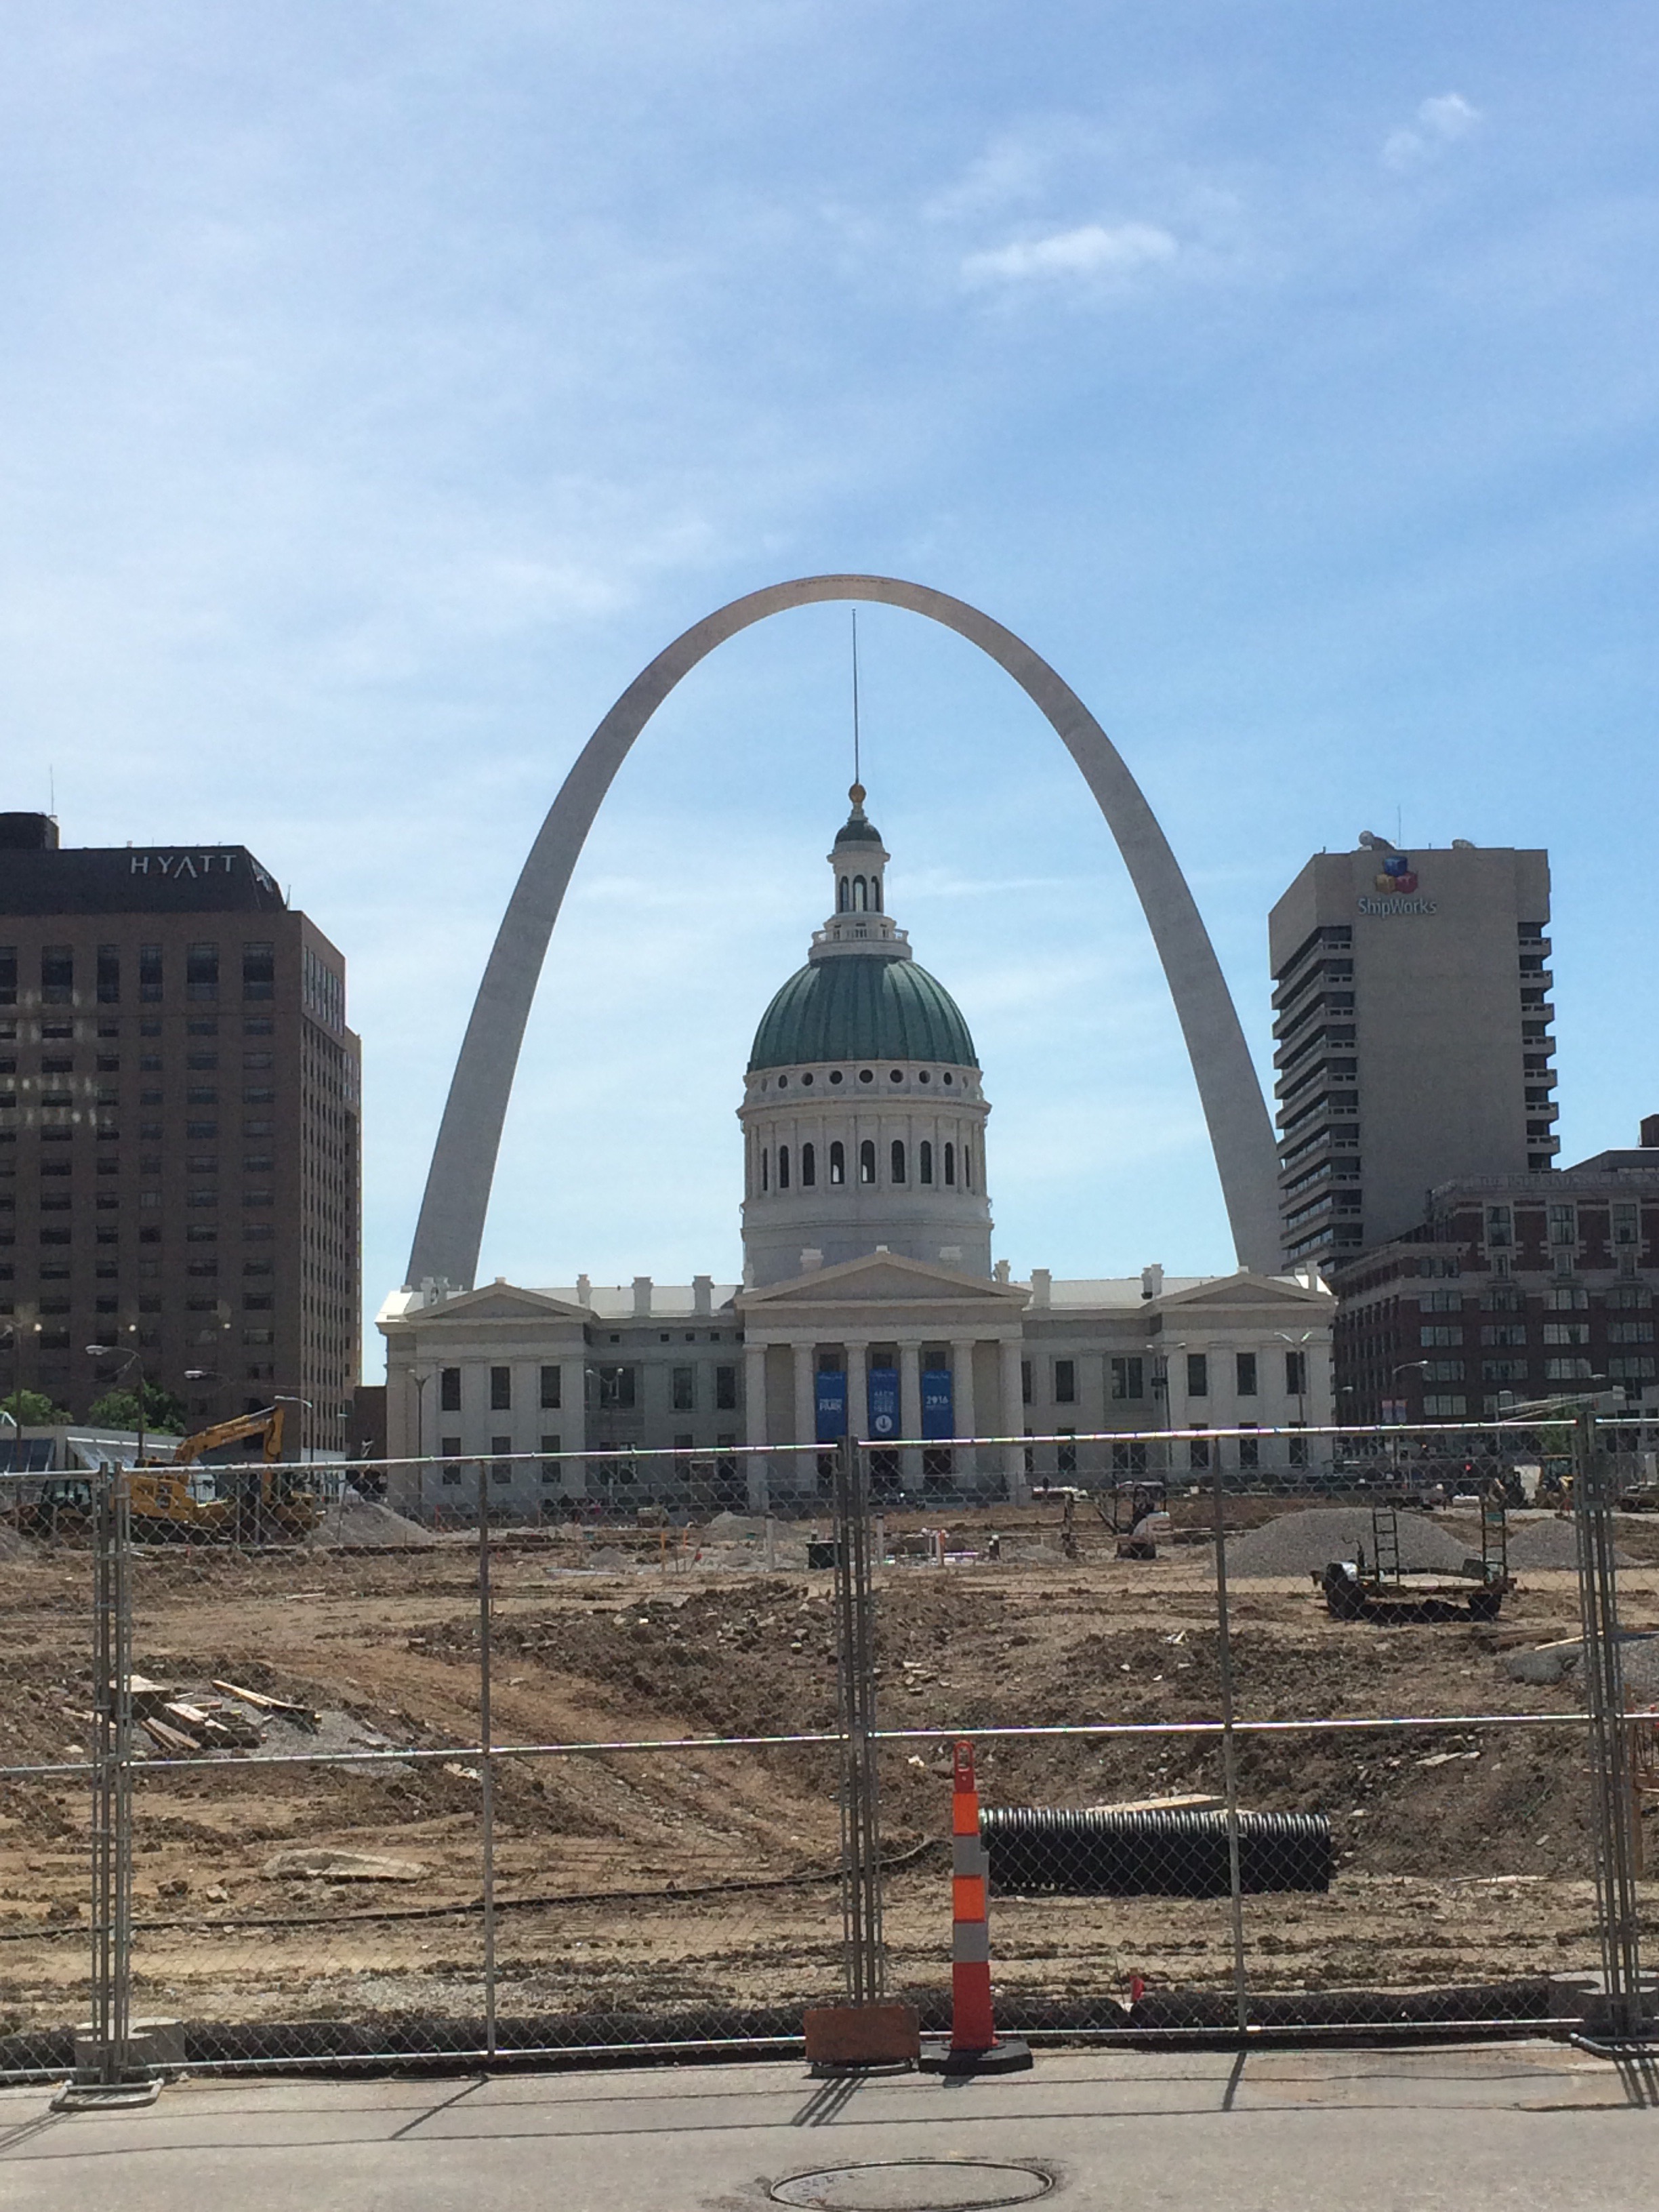 Visiting St. Louis: The St. Louis Arch and Courthouse | It&#39;s a Schmahl World